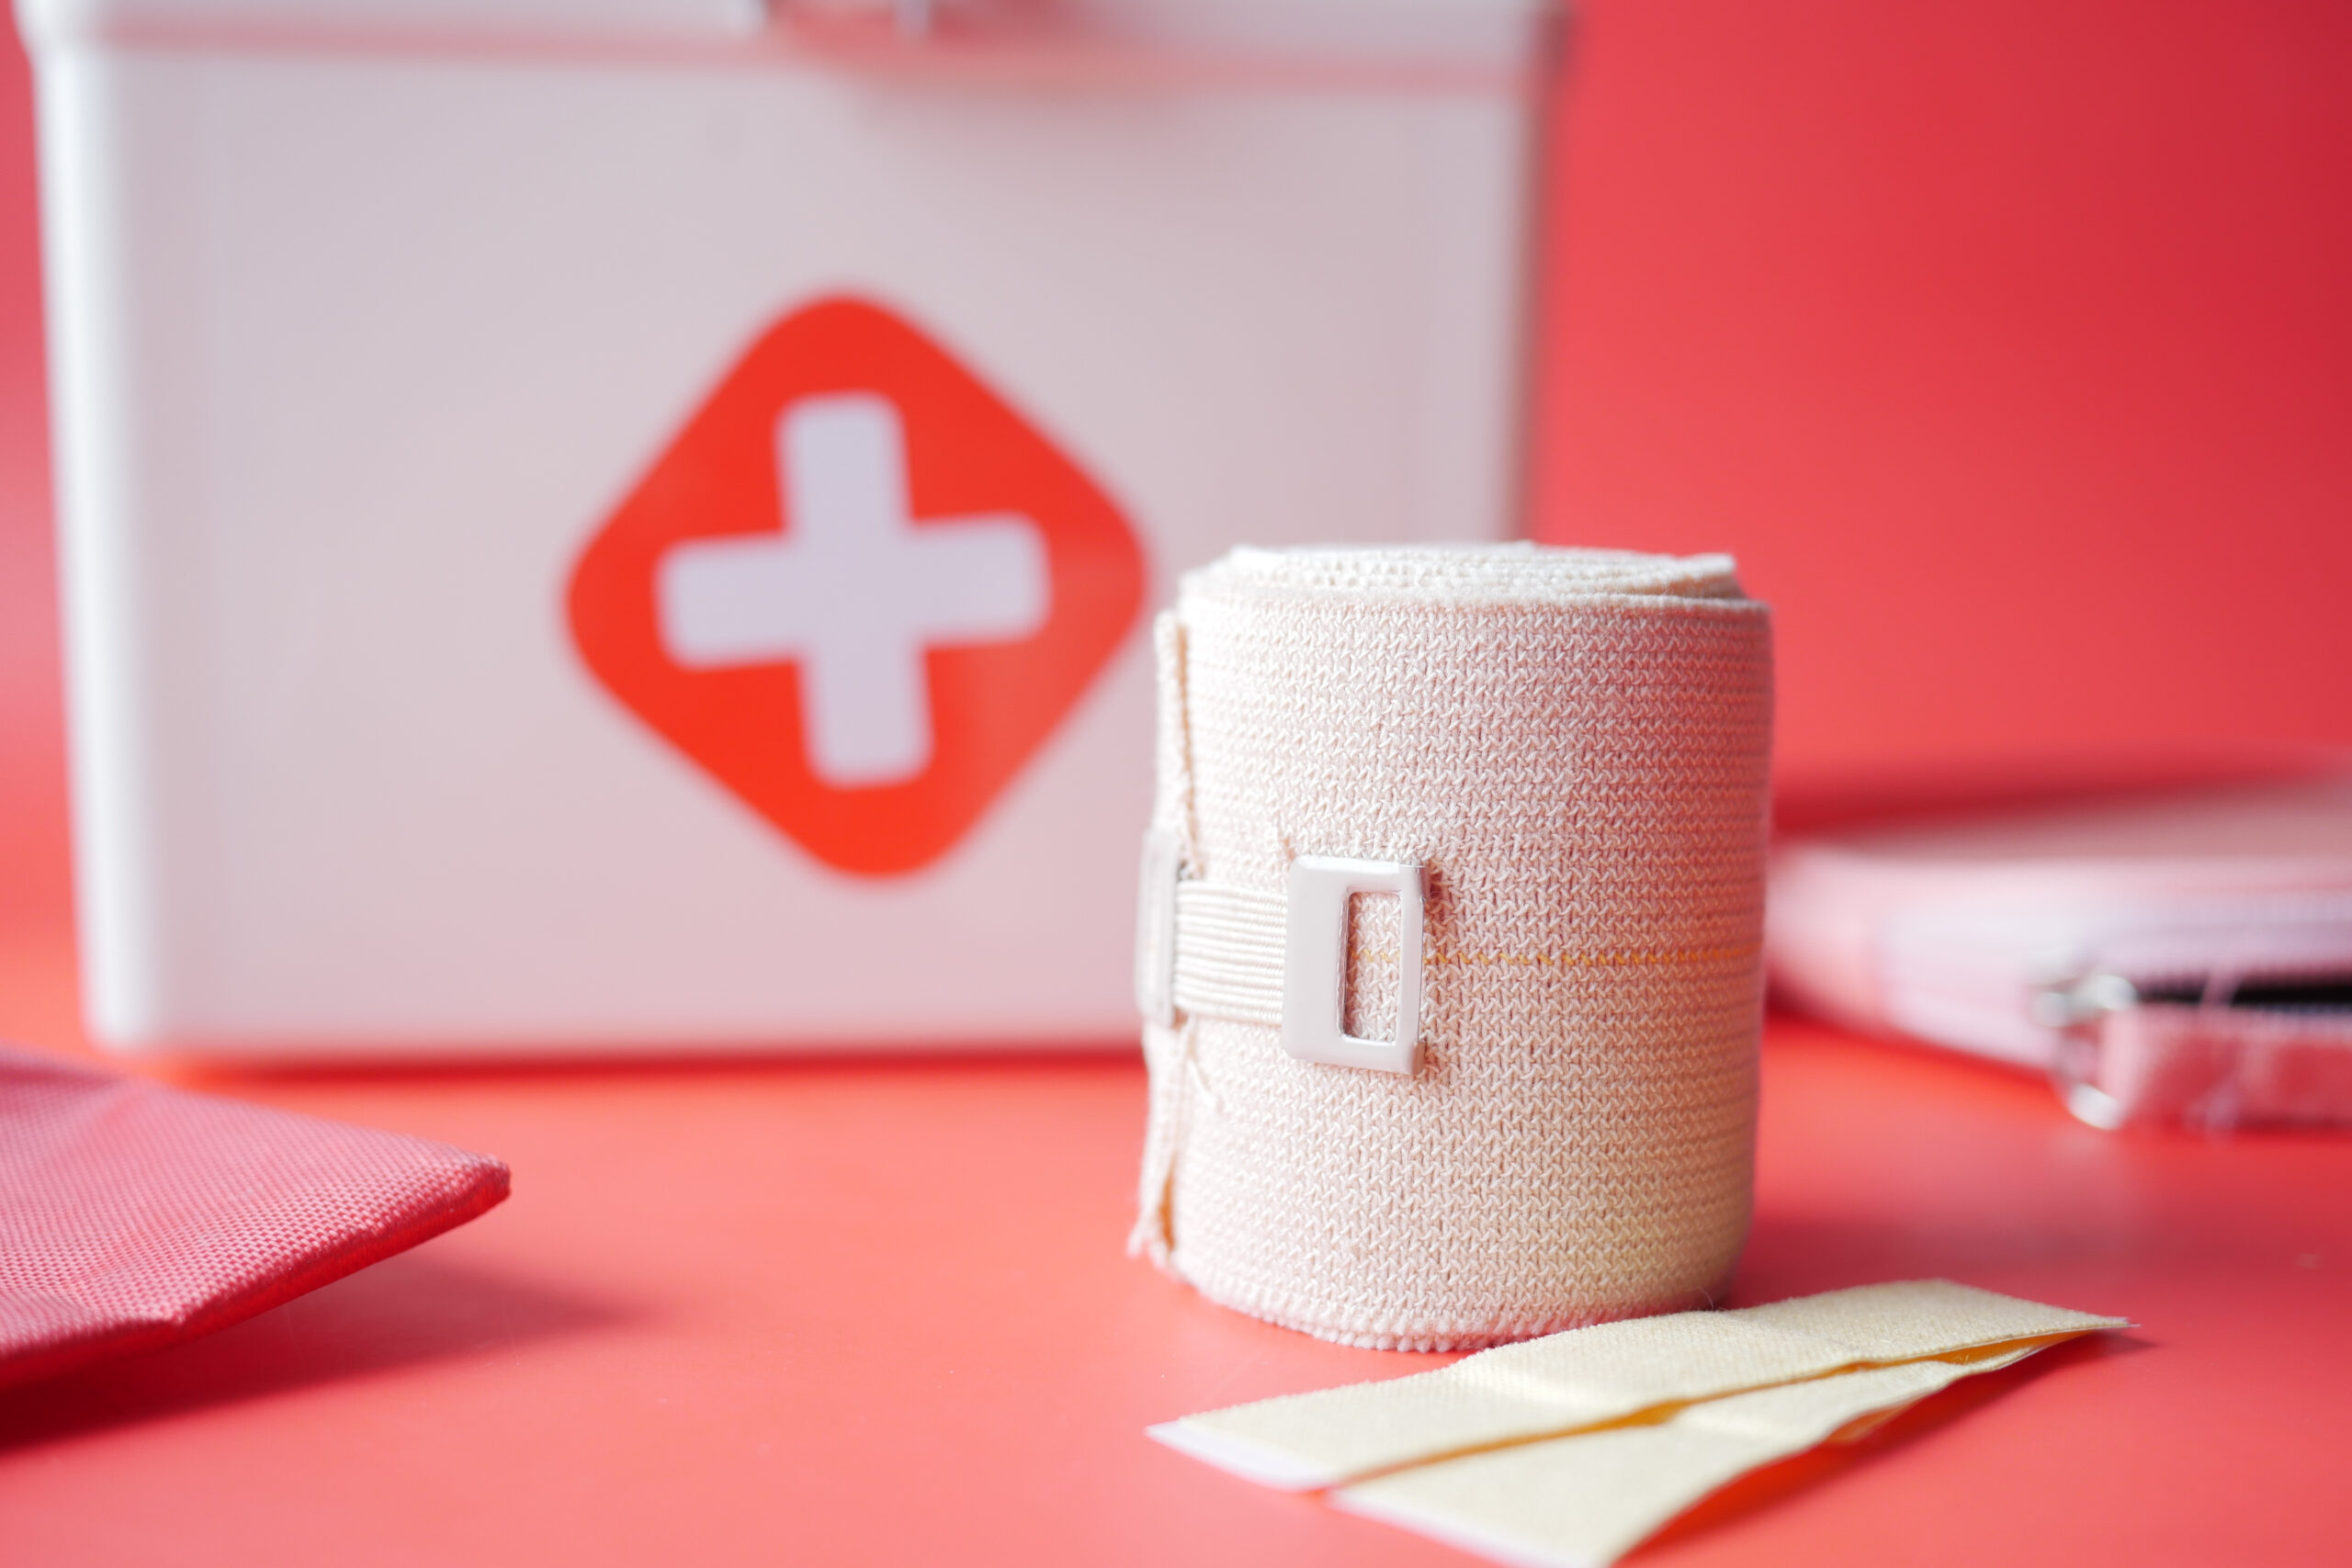 An adhesive bandage and a first aid kit on a table